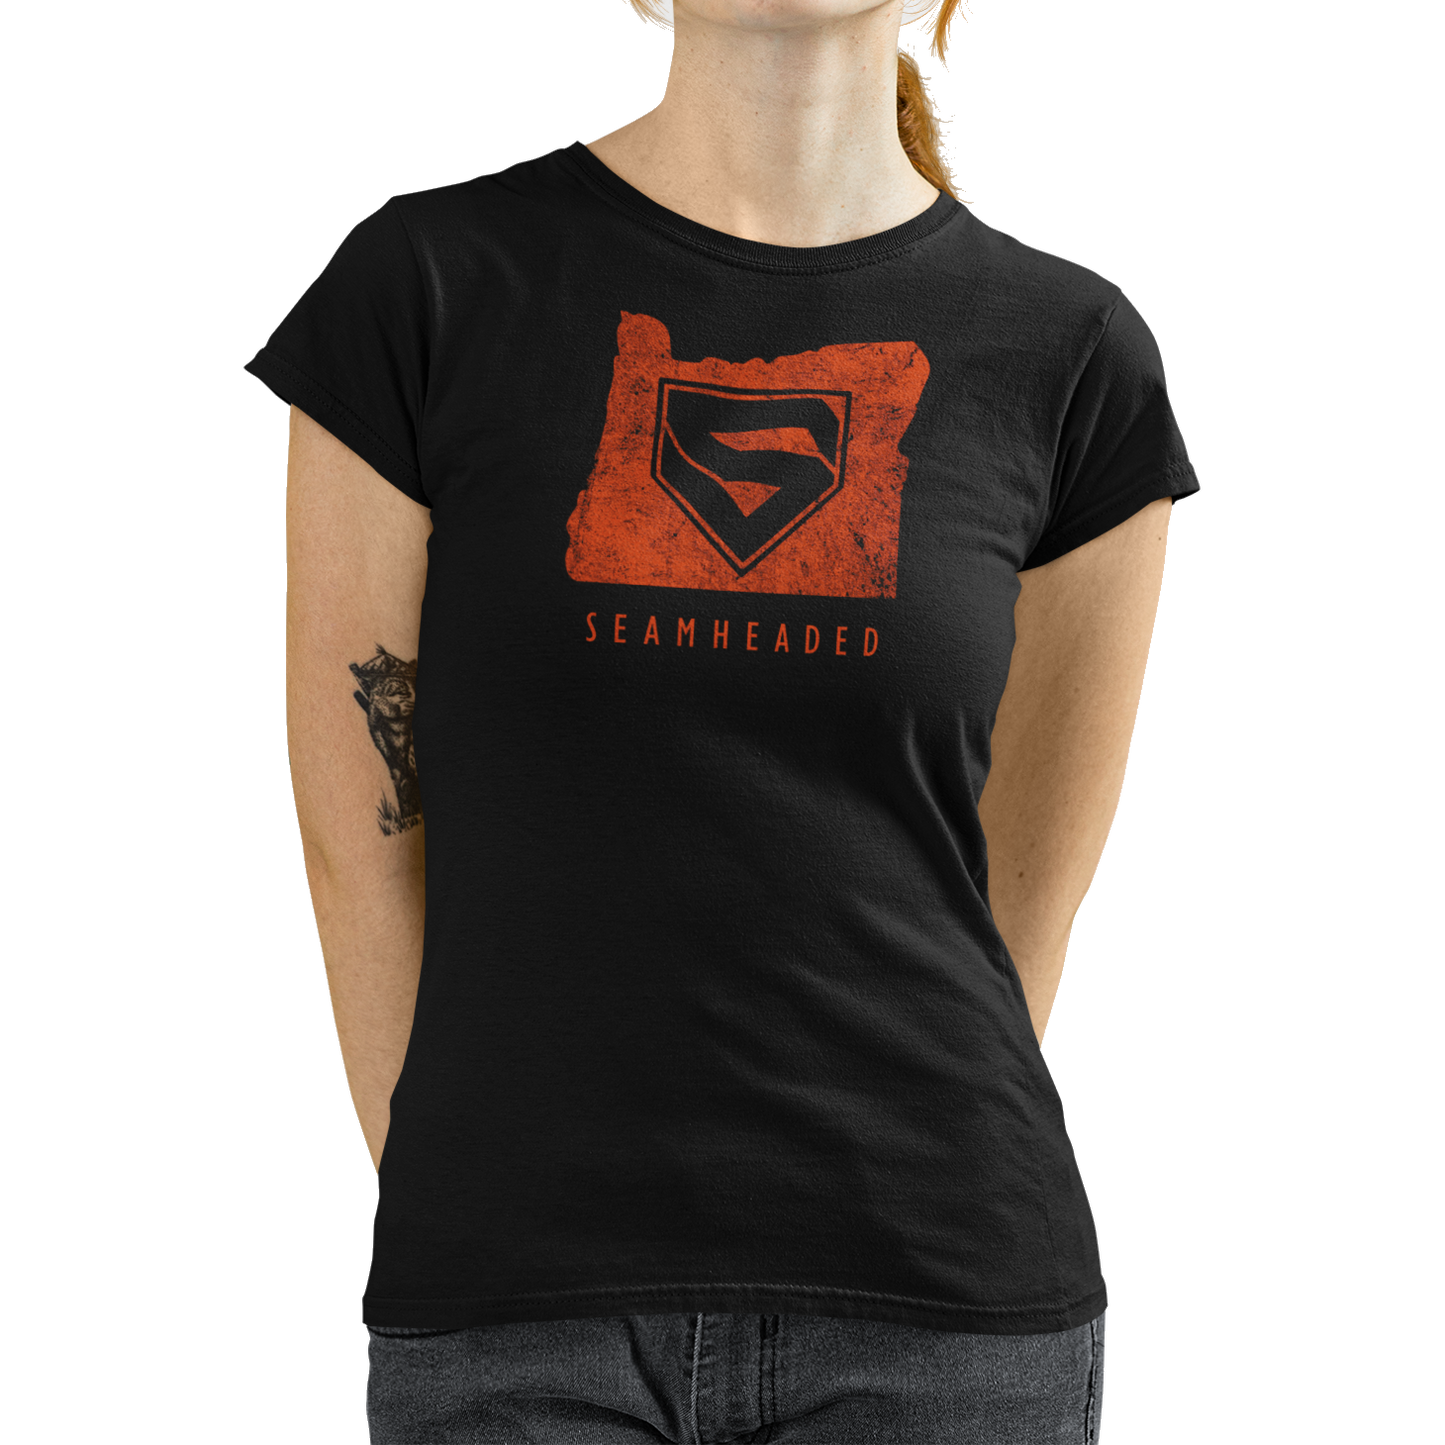 Beaver State Women's Tee from Seamheaded Apparel